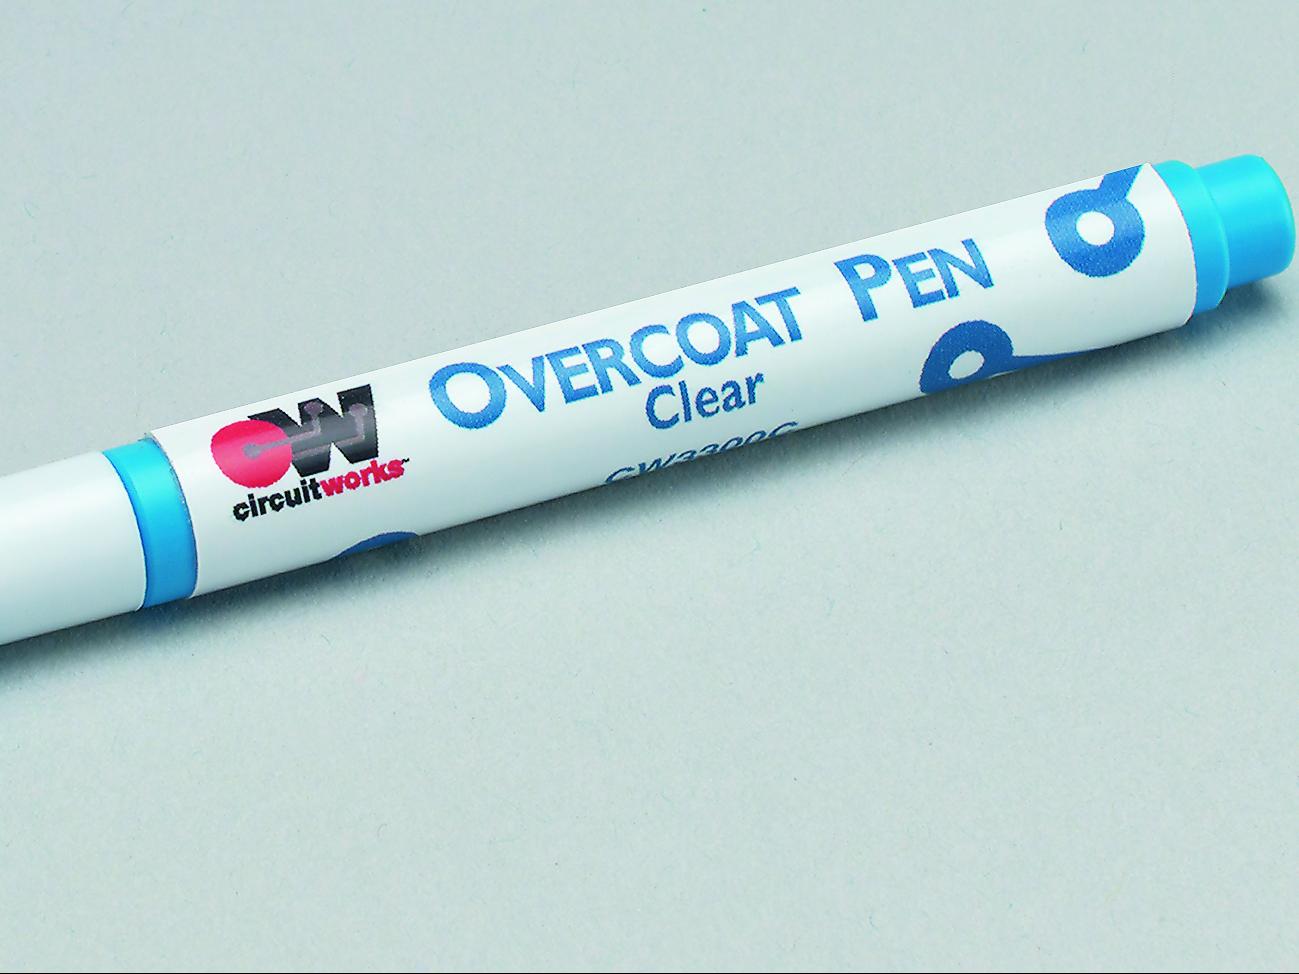 New PCB coating pen from Intertronics